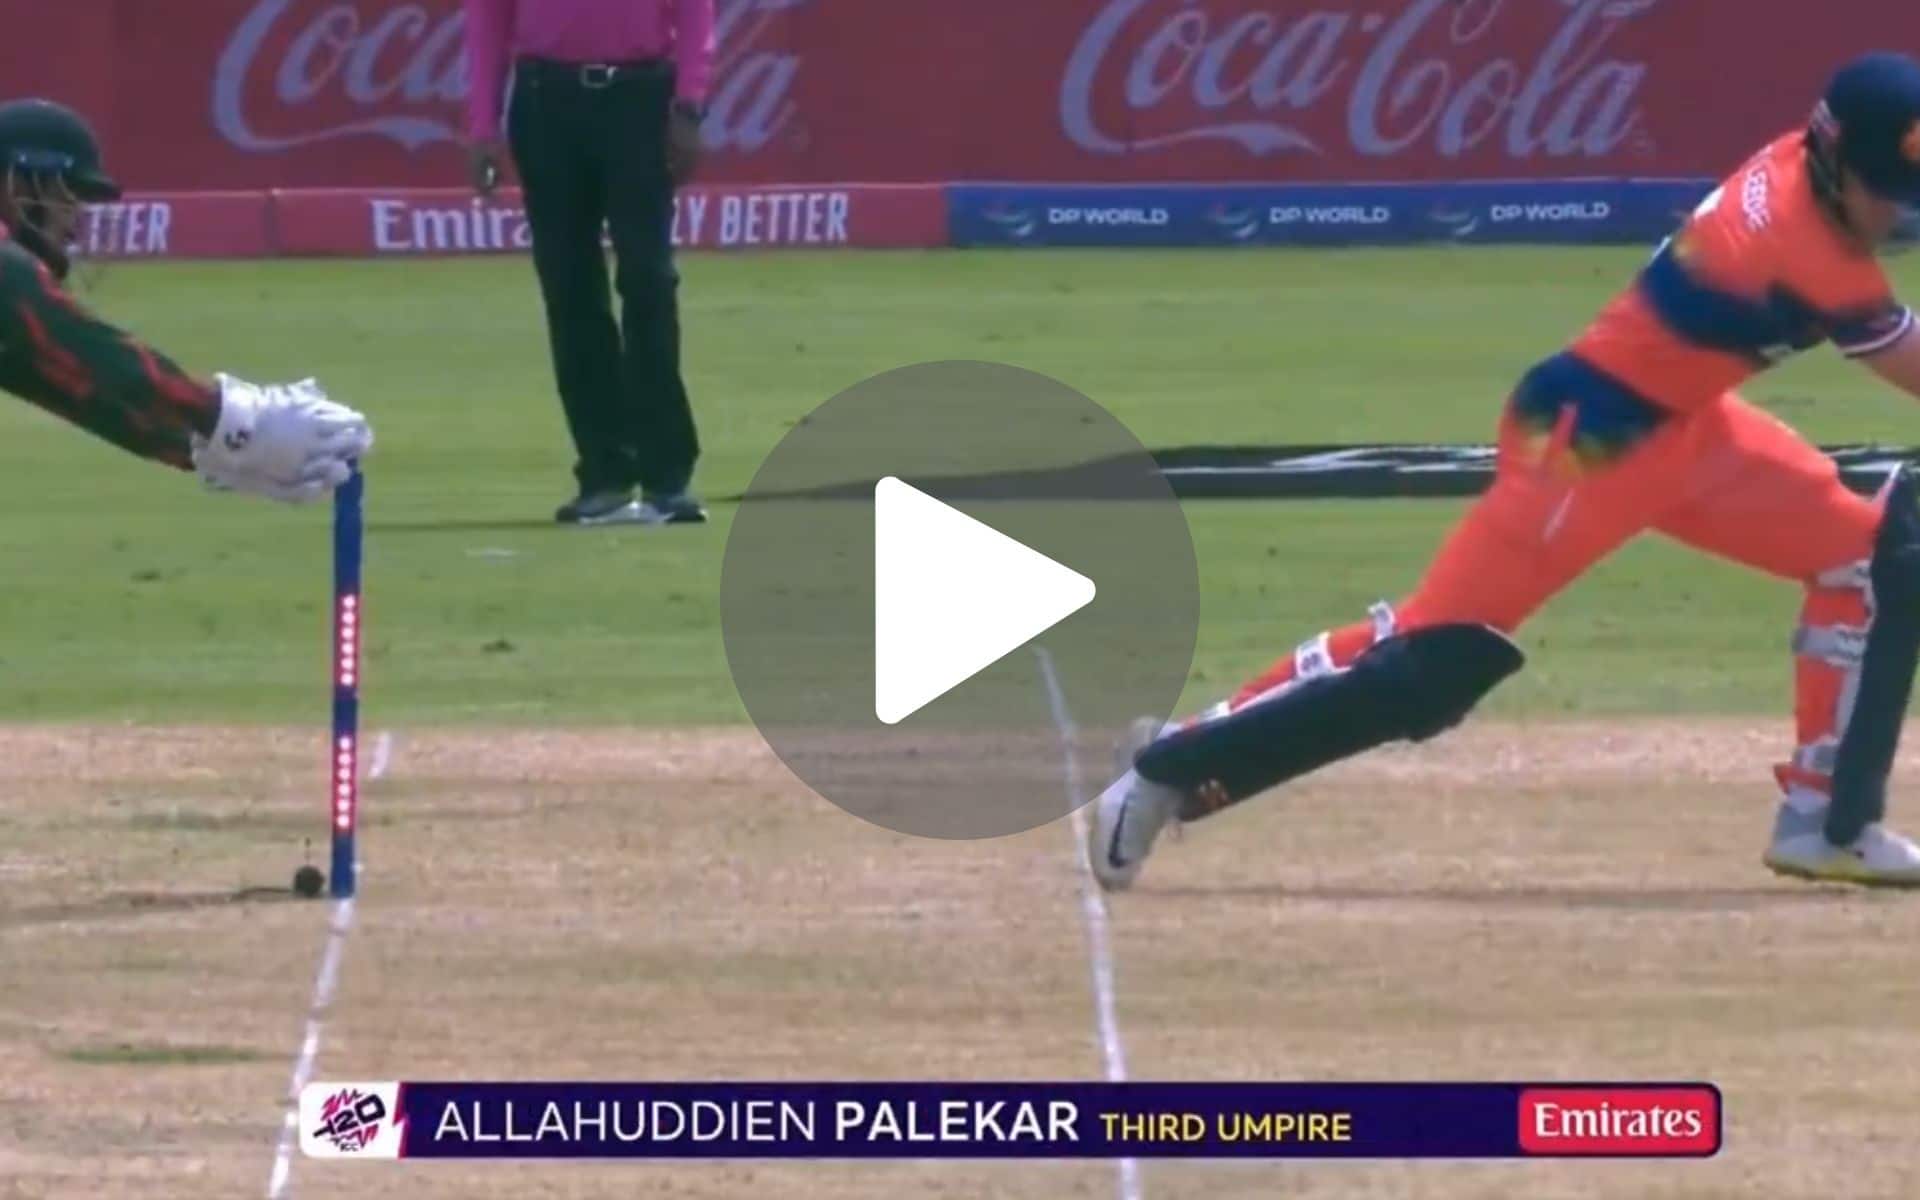 [Watch] Litton Das Pulls Off A Dhoni-Like Stumping To Dismiss Bas de Leede For A Duck